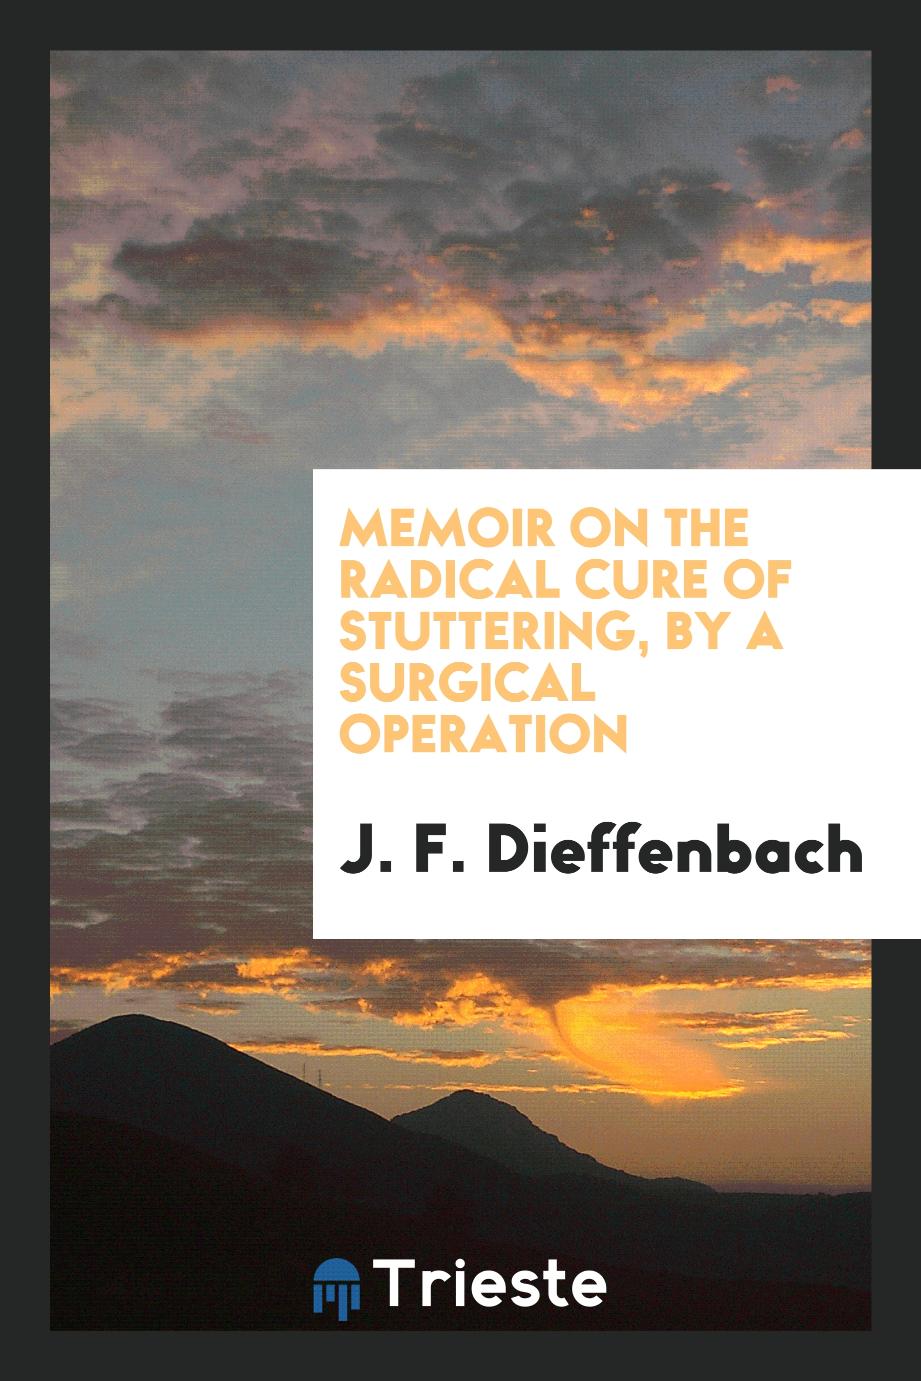 Memoir on the radical cure of stuttering, by a surgical operation